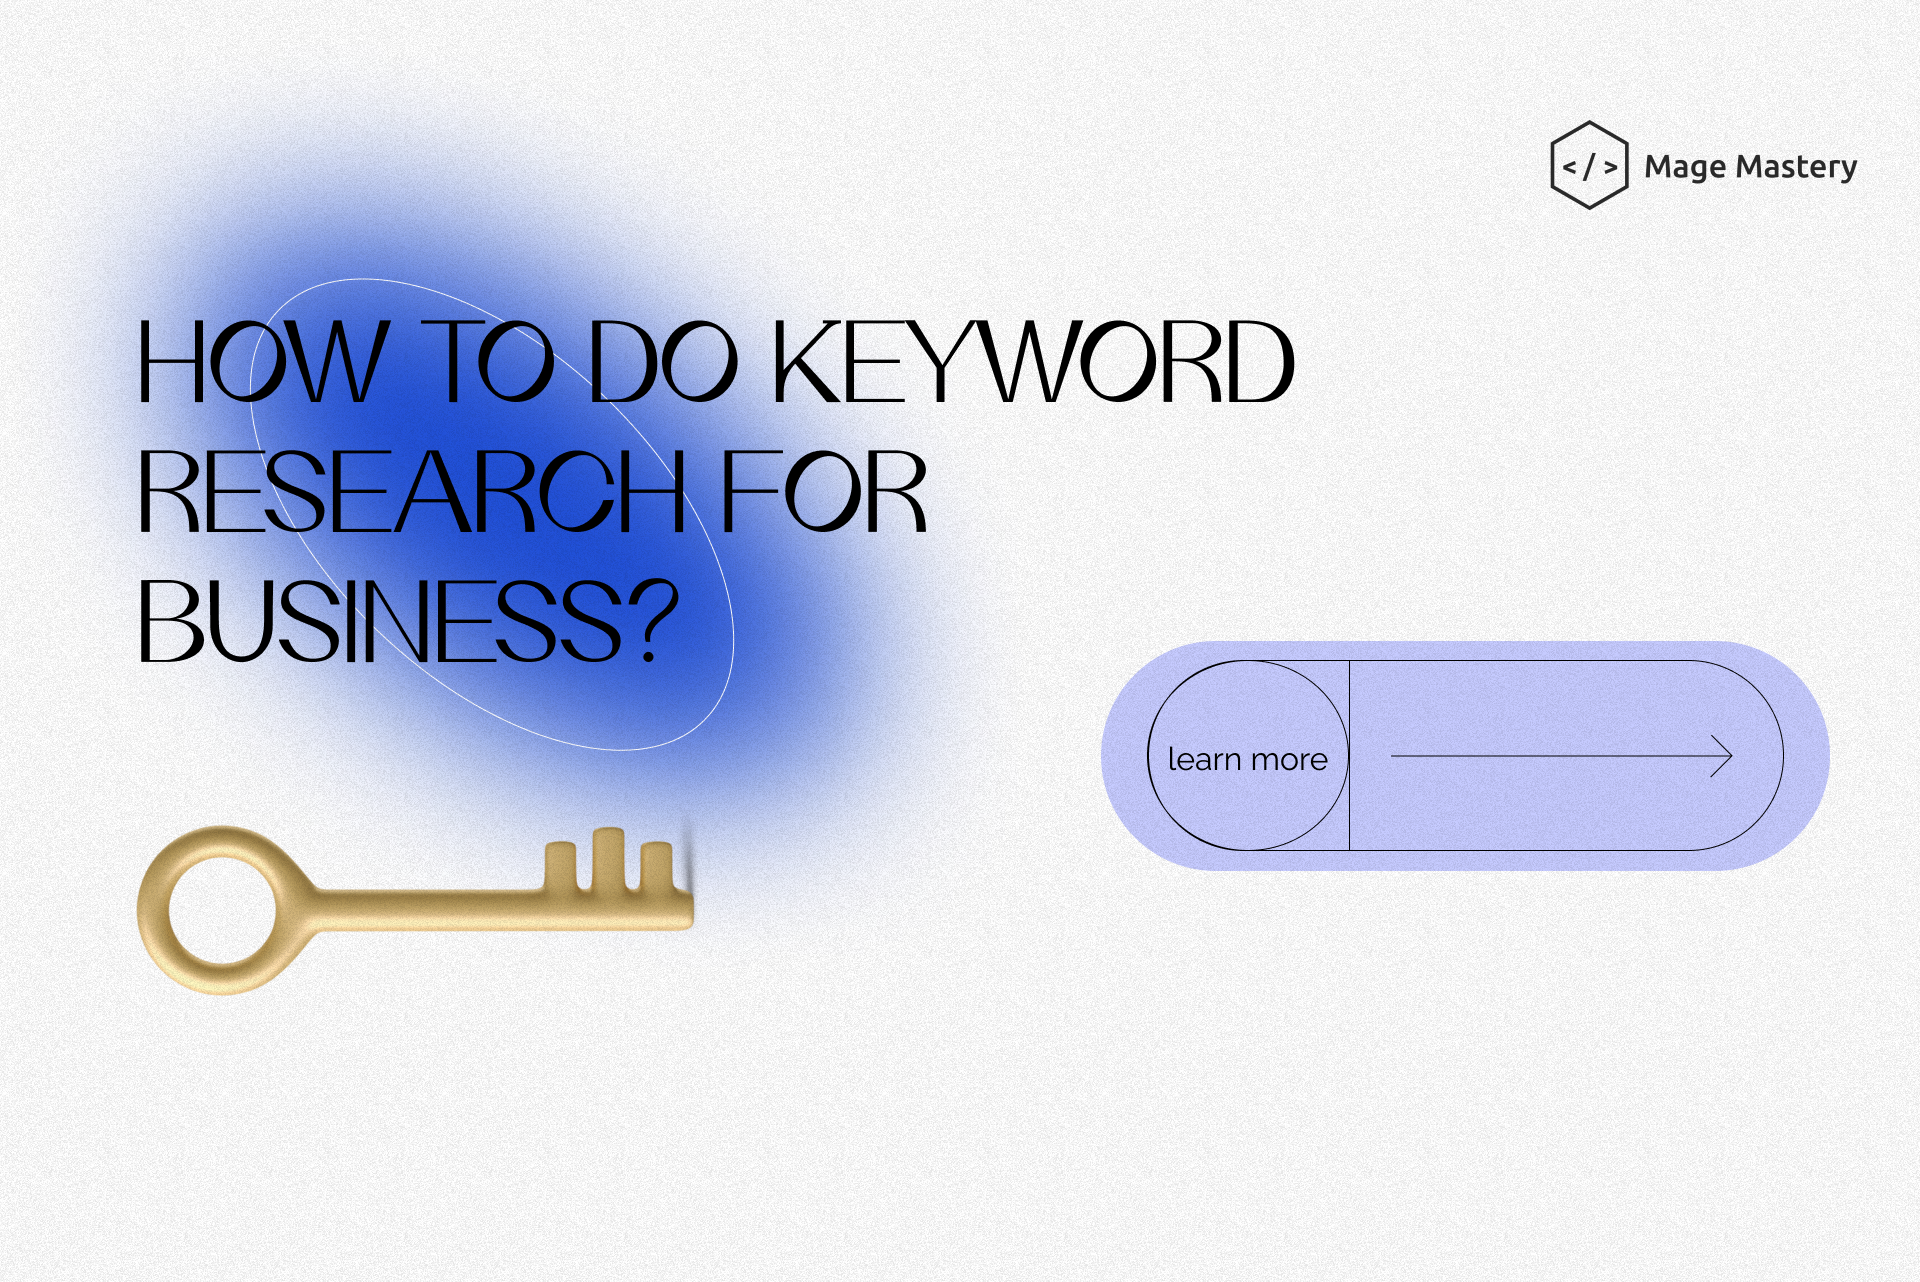 How to do keyword research for business?